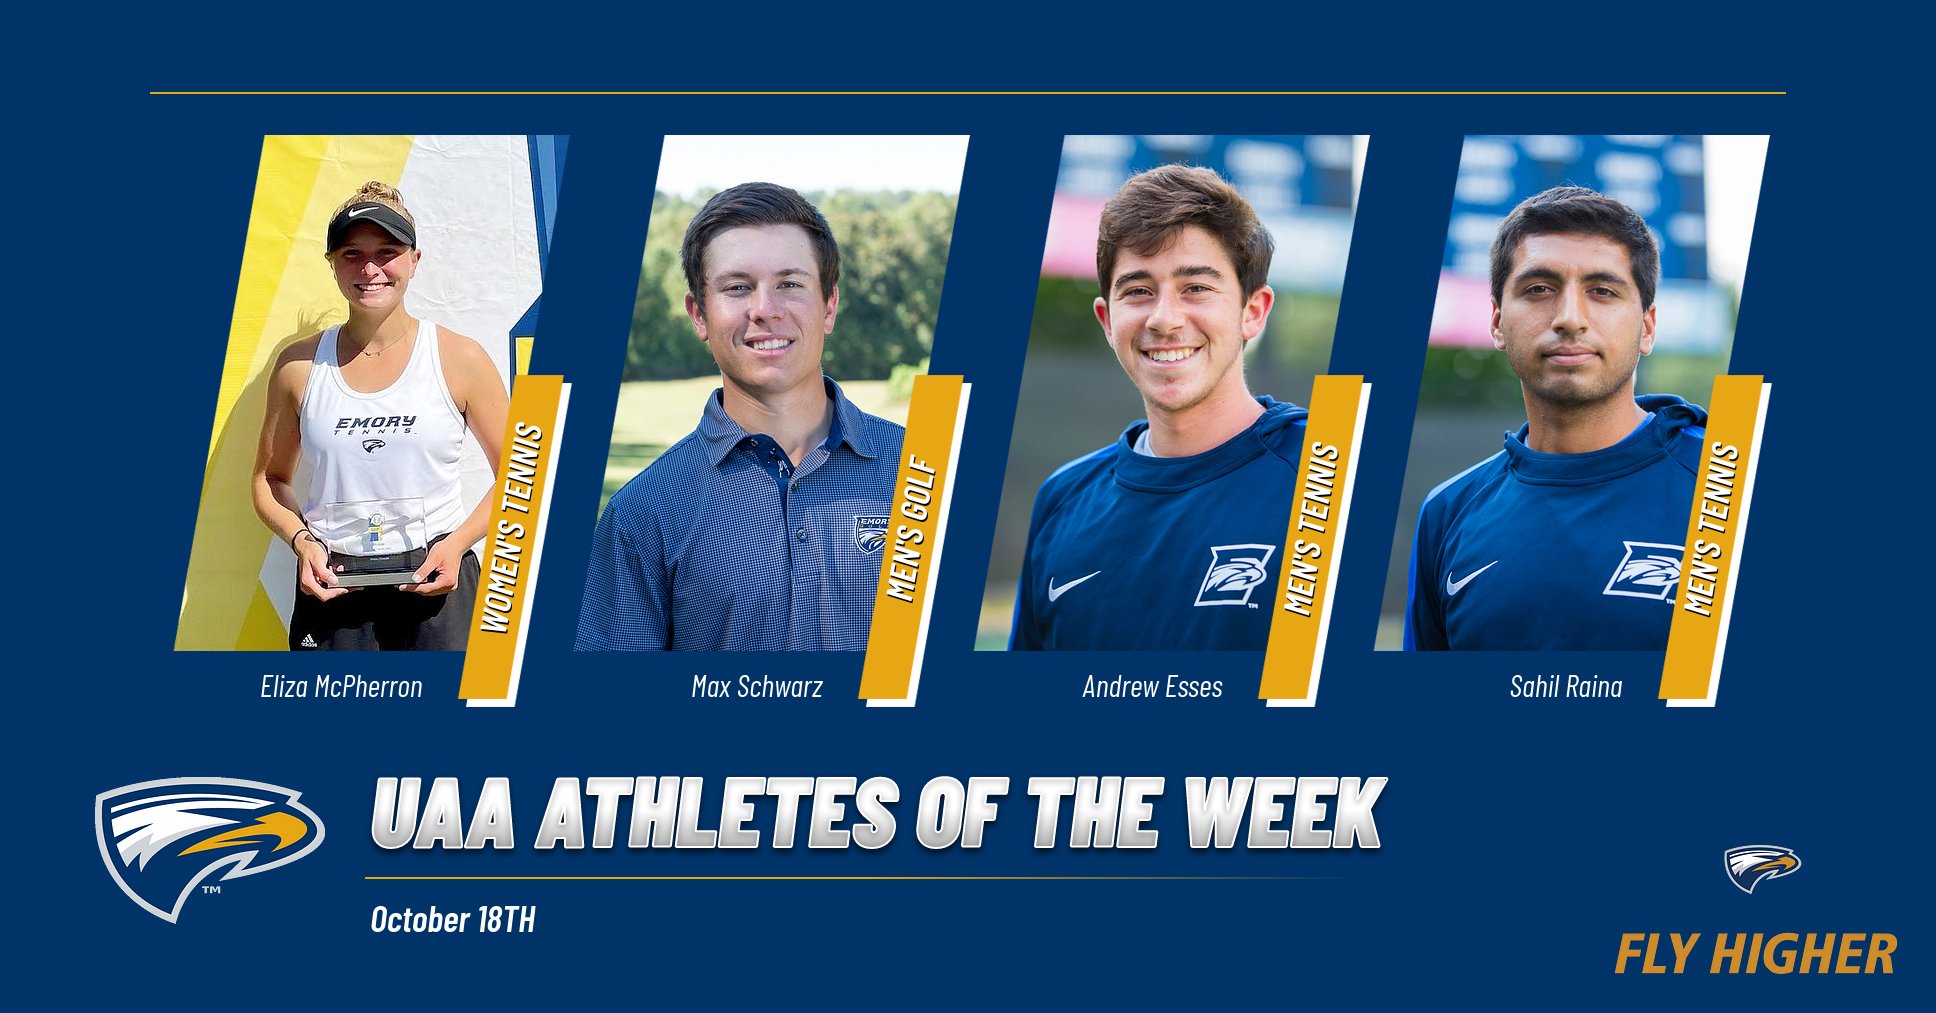 Eagles Collect Four UAA Athlete of the Week Awards